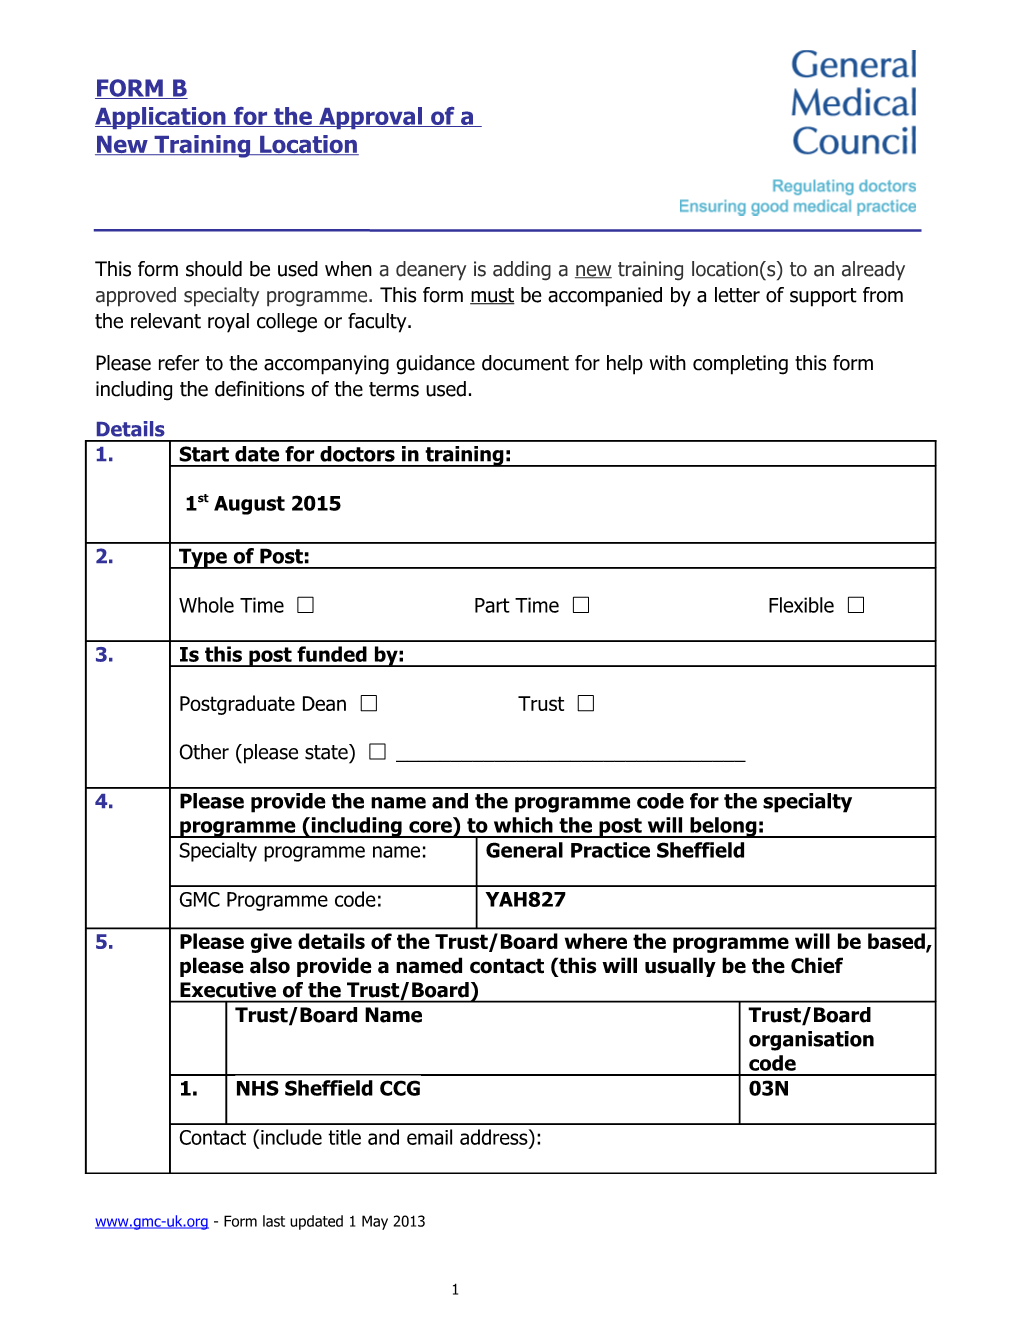 This Form Should Be Used to Apply for Approval of a New Training Programme